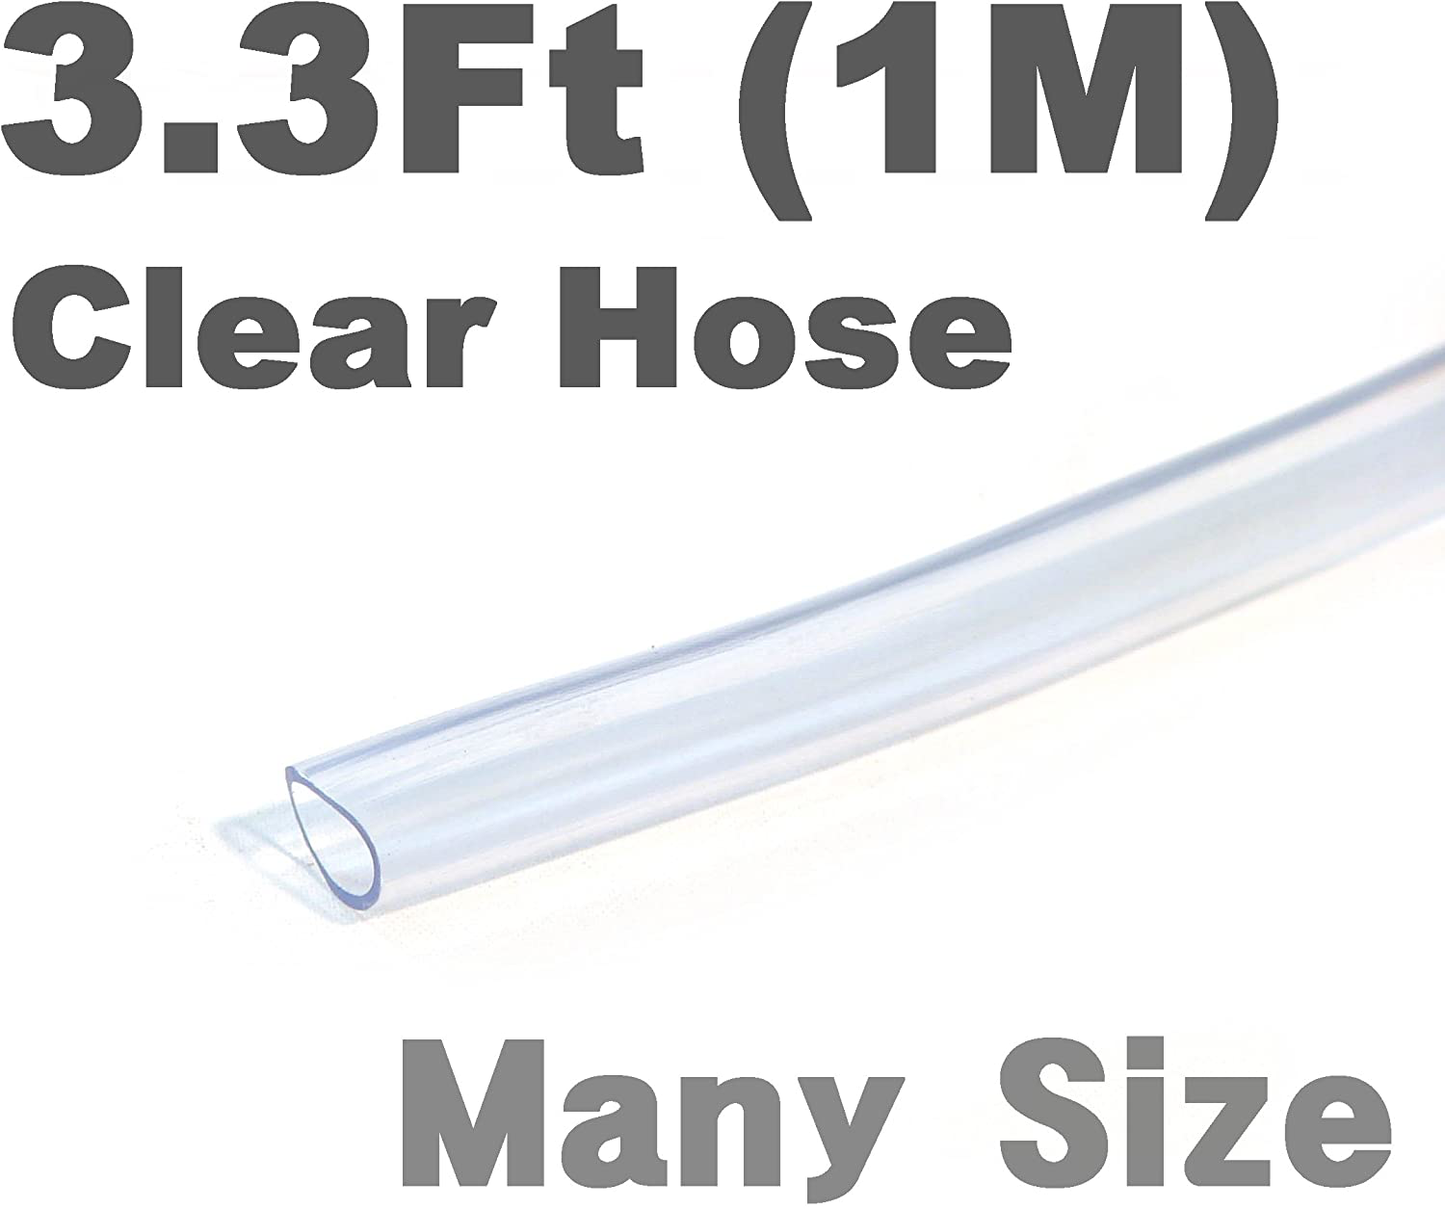 SMI Inner 5/16" Outer 11Mm 3.3 Ft 1 Metre PVC Clear Tubing Flexible Air Food Water Delivery Feeding Hose Garden Pond Aquarium Animals & Pet Supplies > Pet Supplies > Fish Supplies > Aquarium & Pond Tubing SMI   